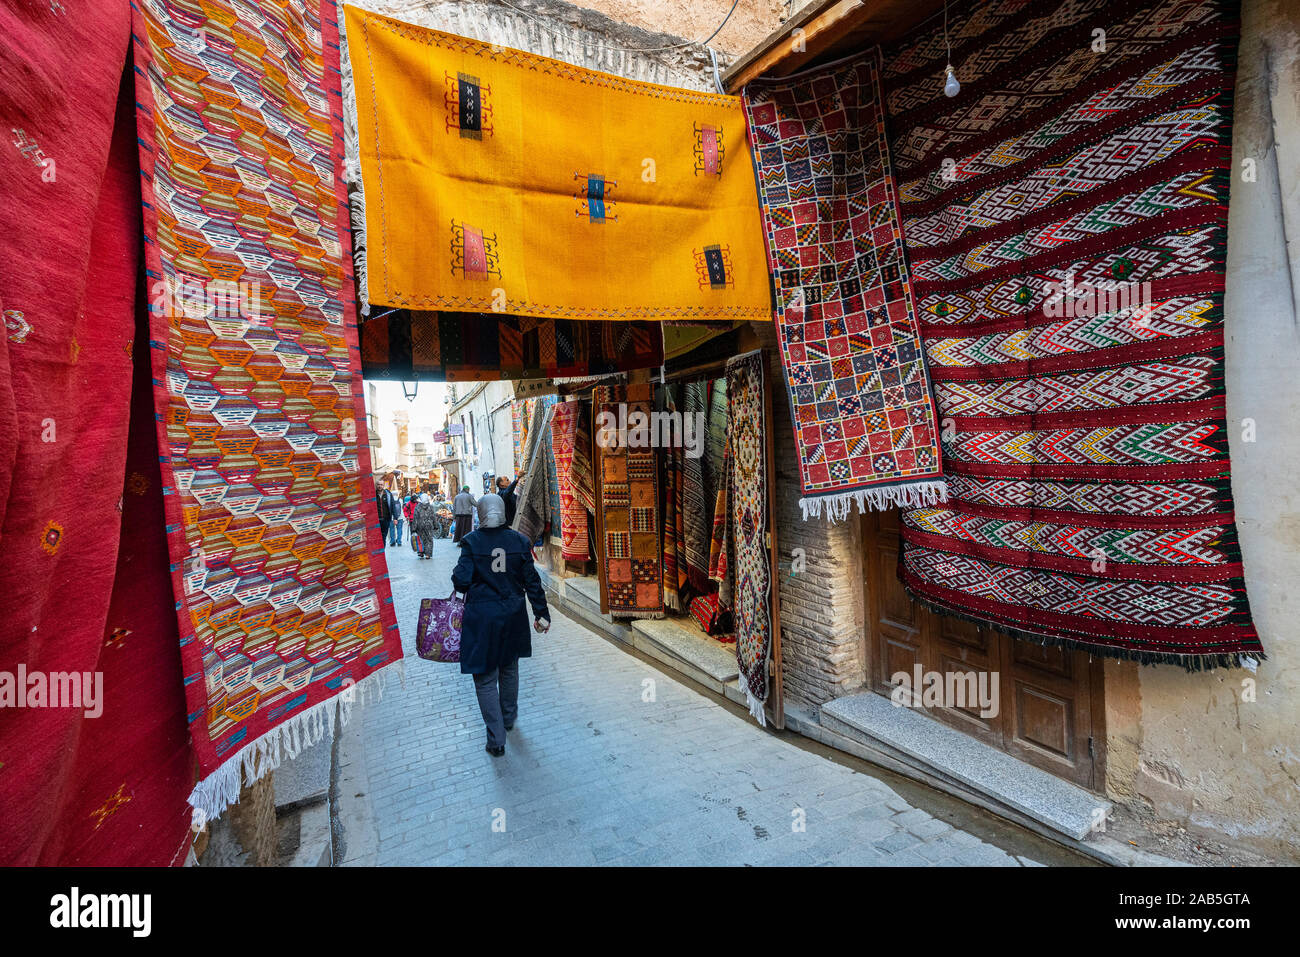 Fes, Morocco. November 9, 2019. Carpet sellers on the streets of the medina Stock Photo